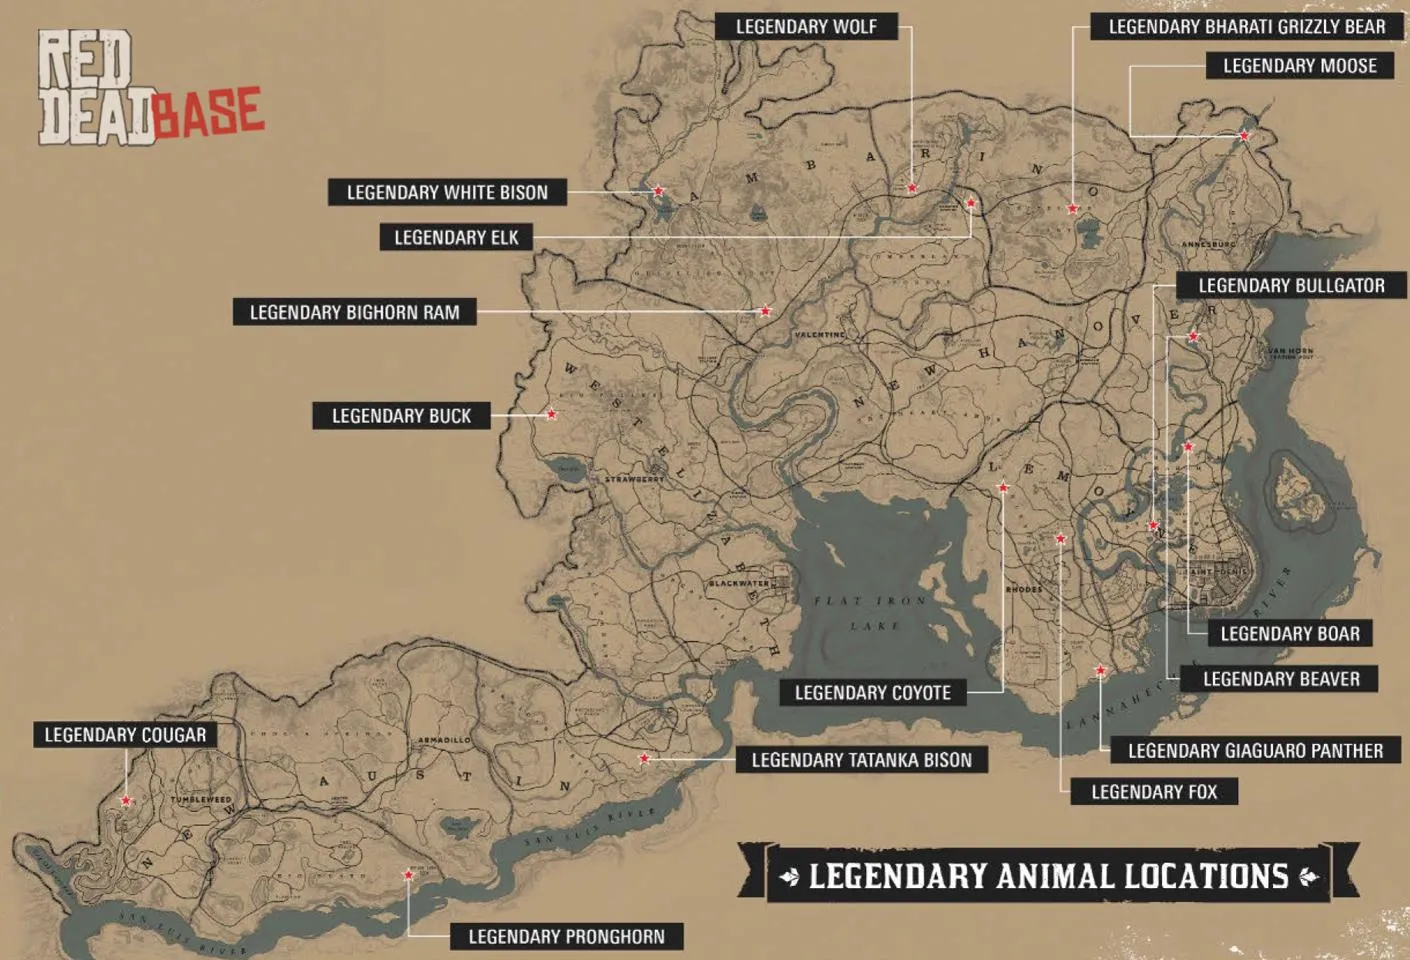 Legendary Bharati Grizzly Bear - Map Location in RDR2